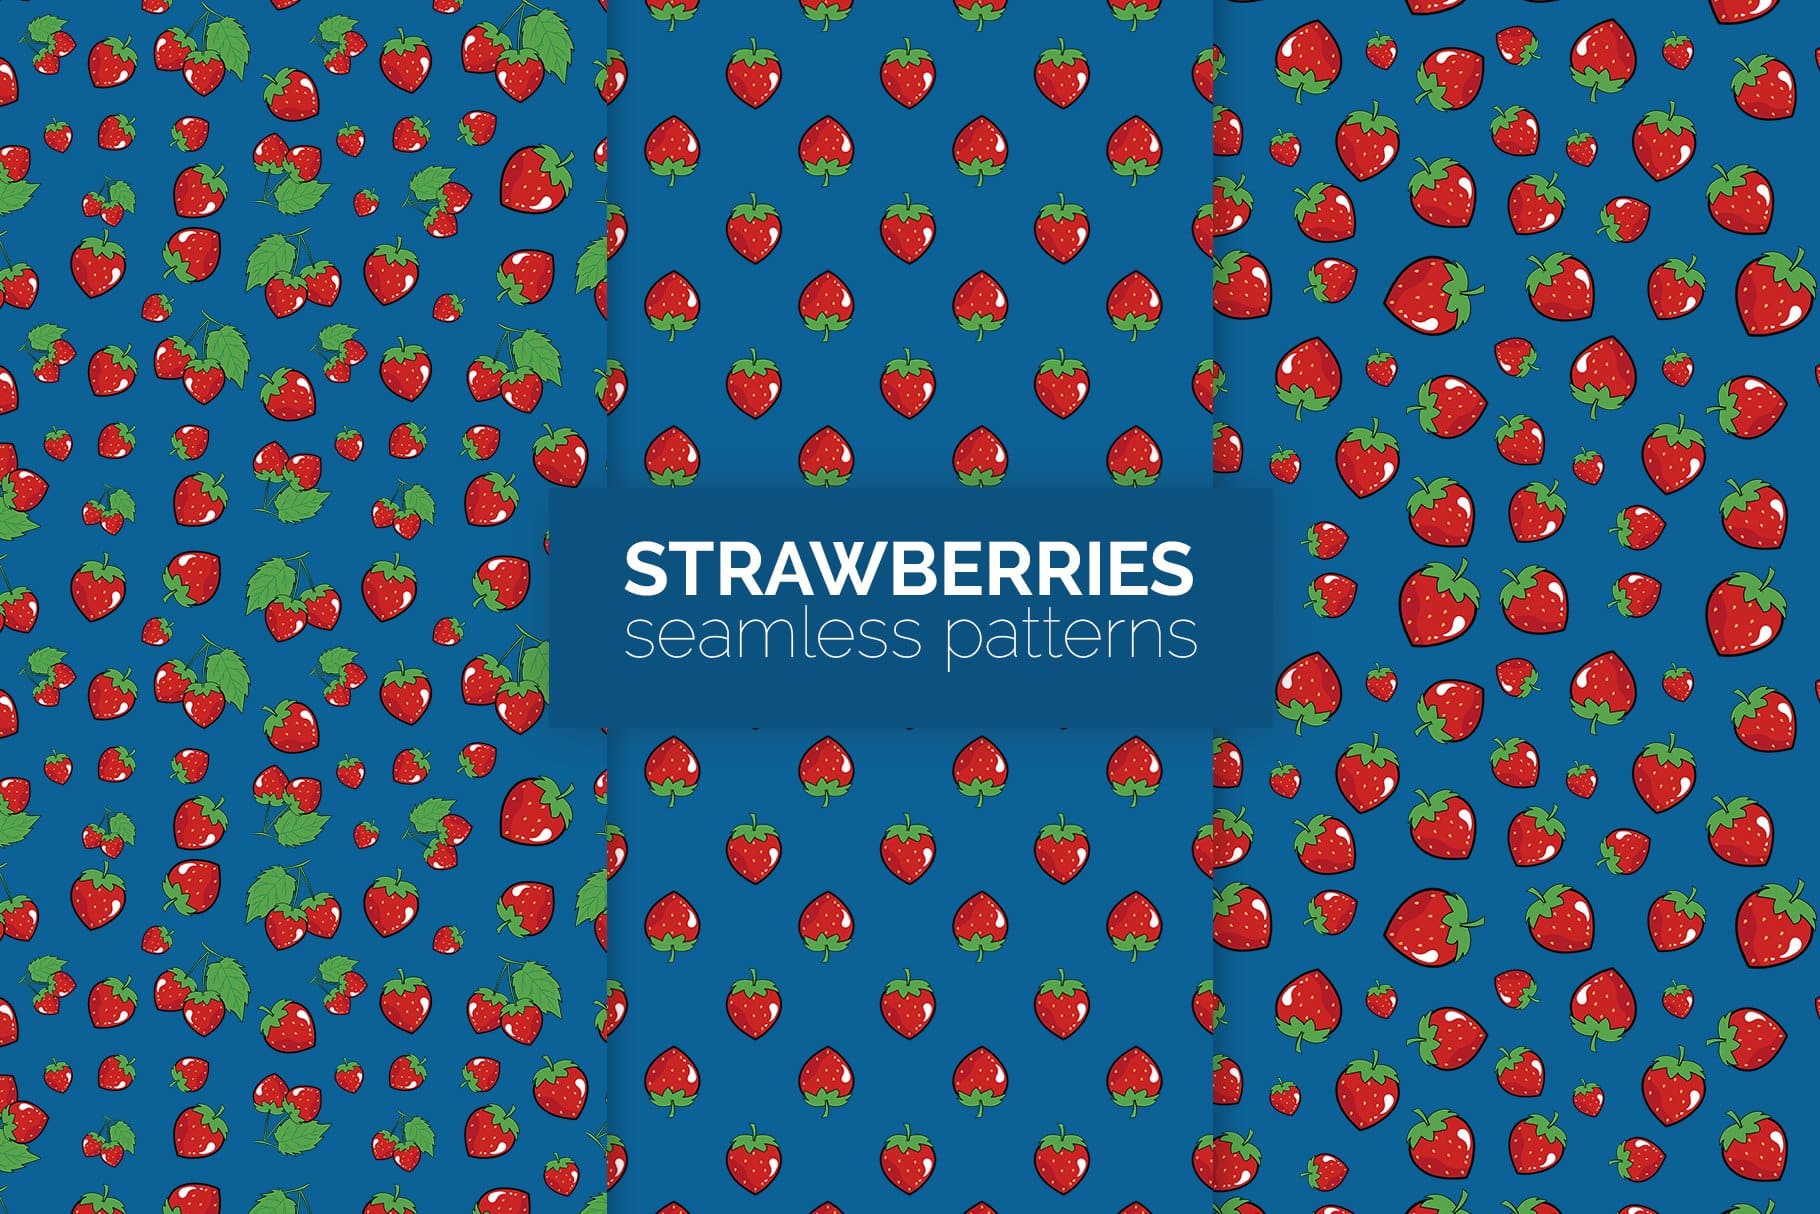 Pattern of red strawberries with green leaves on a blue background.